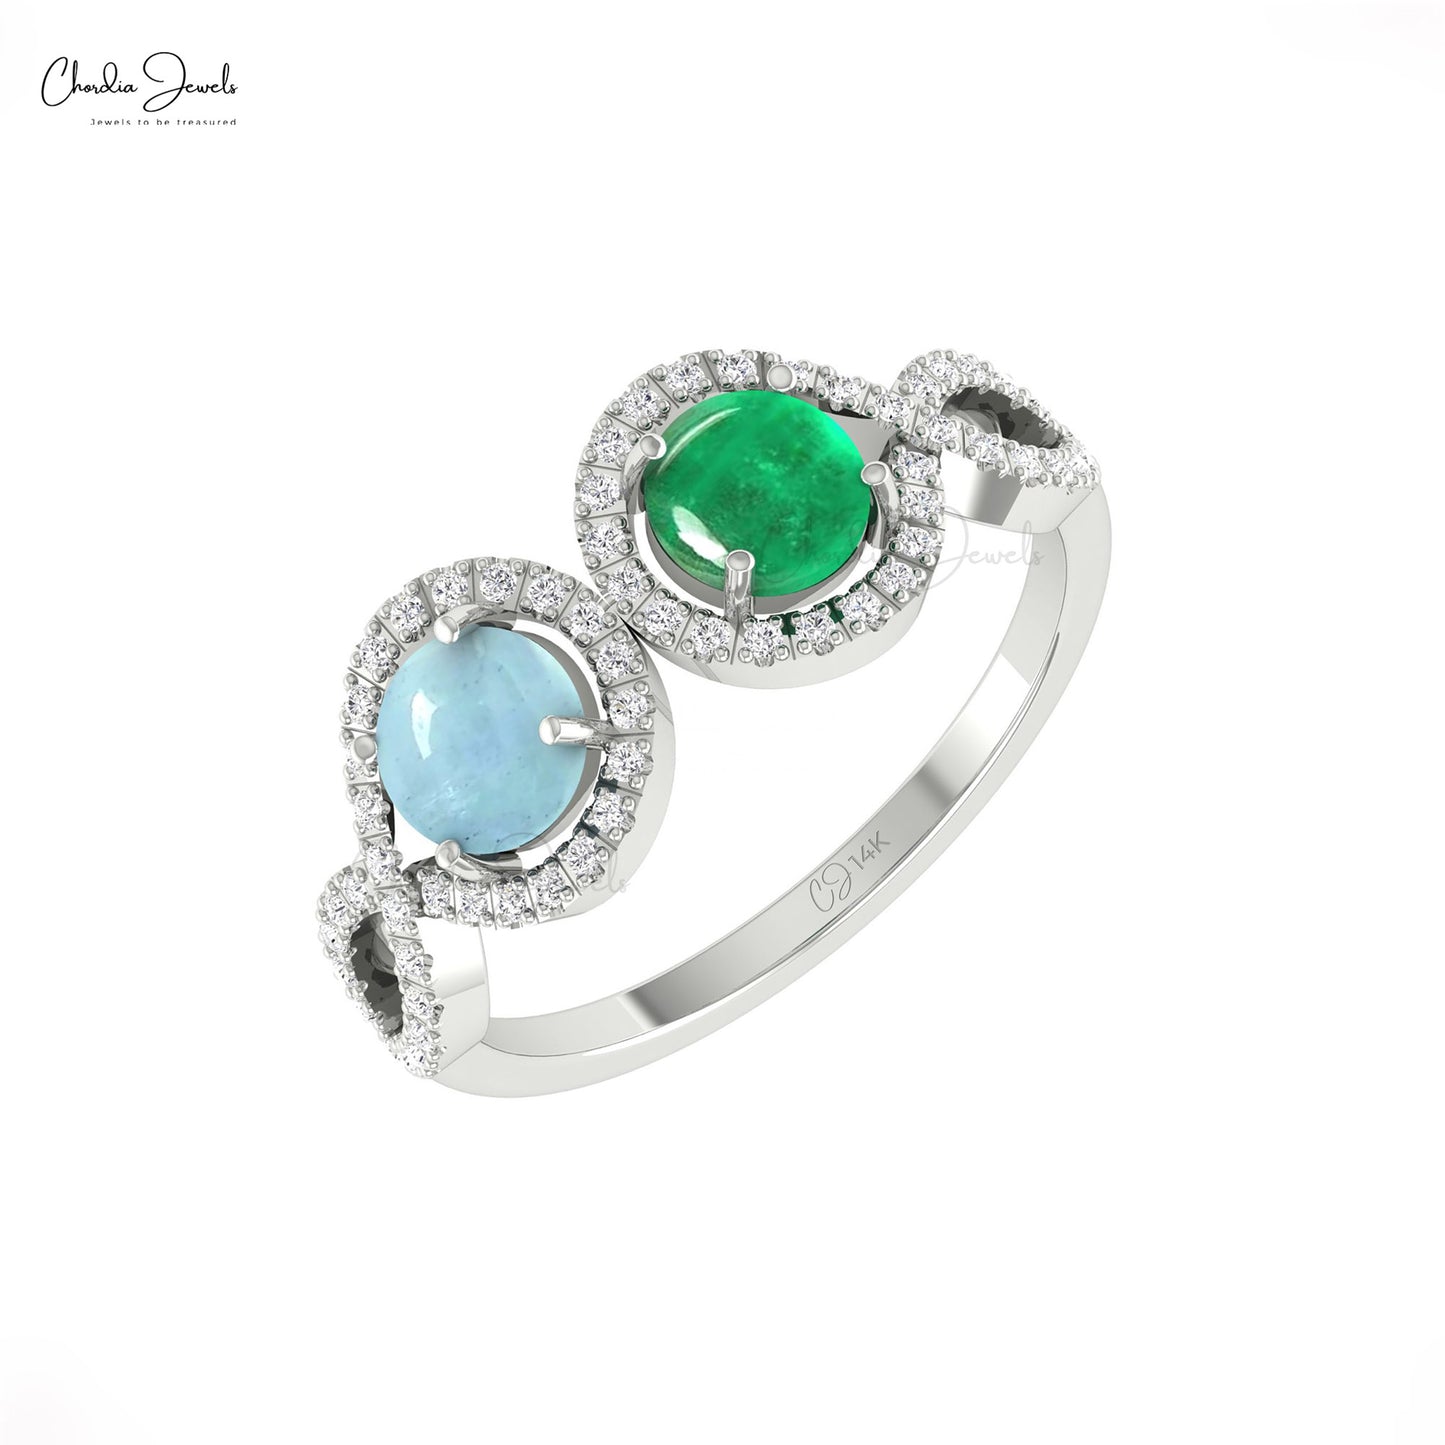 Captivate hearts with our emerald wedding ring.